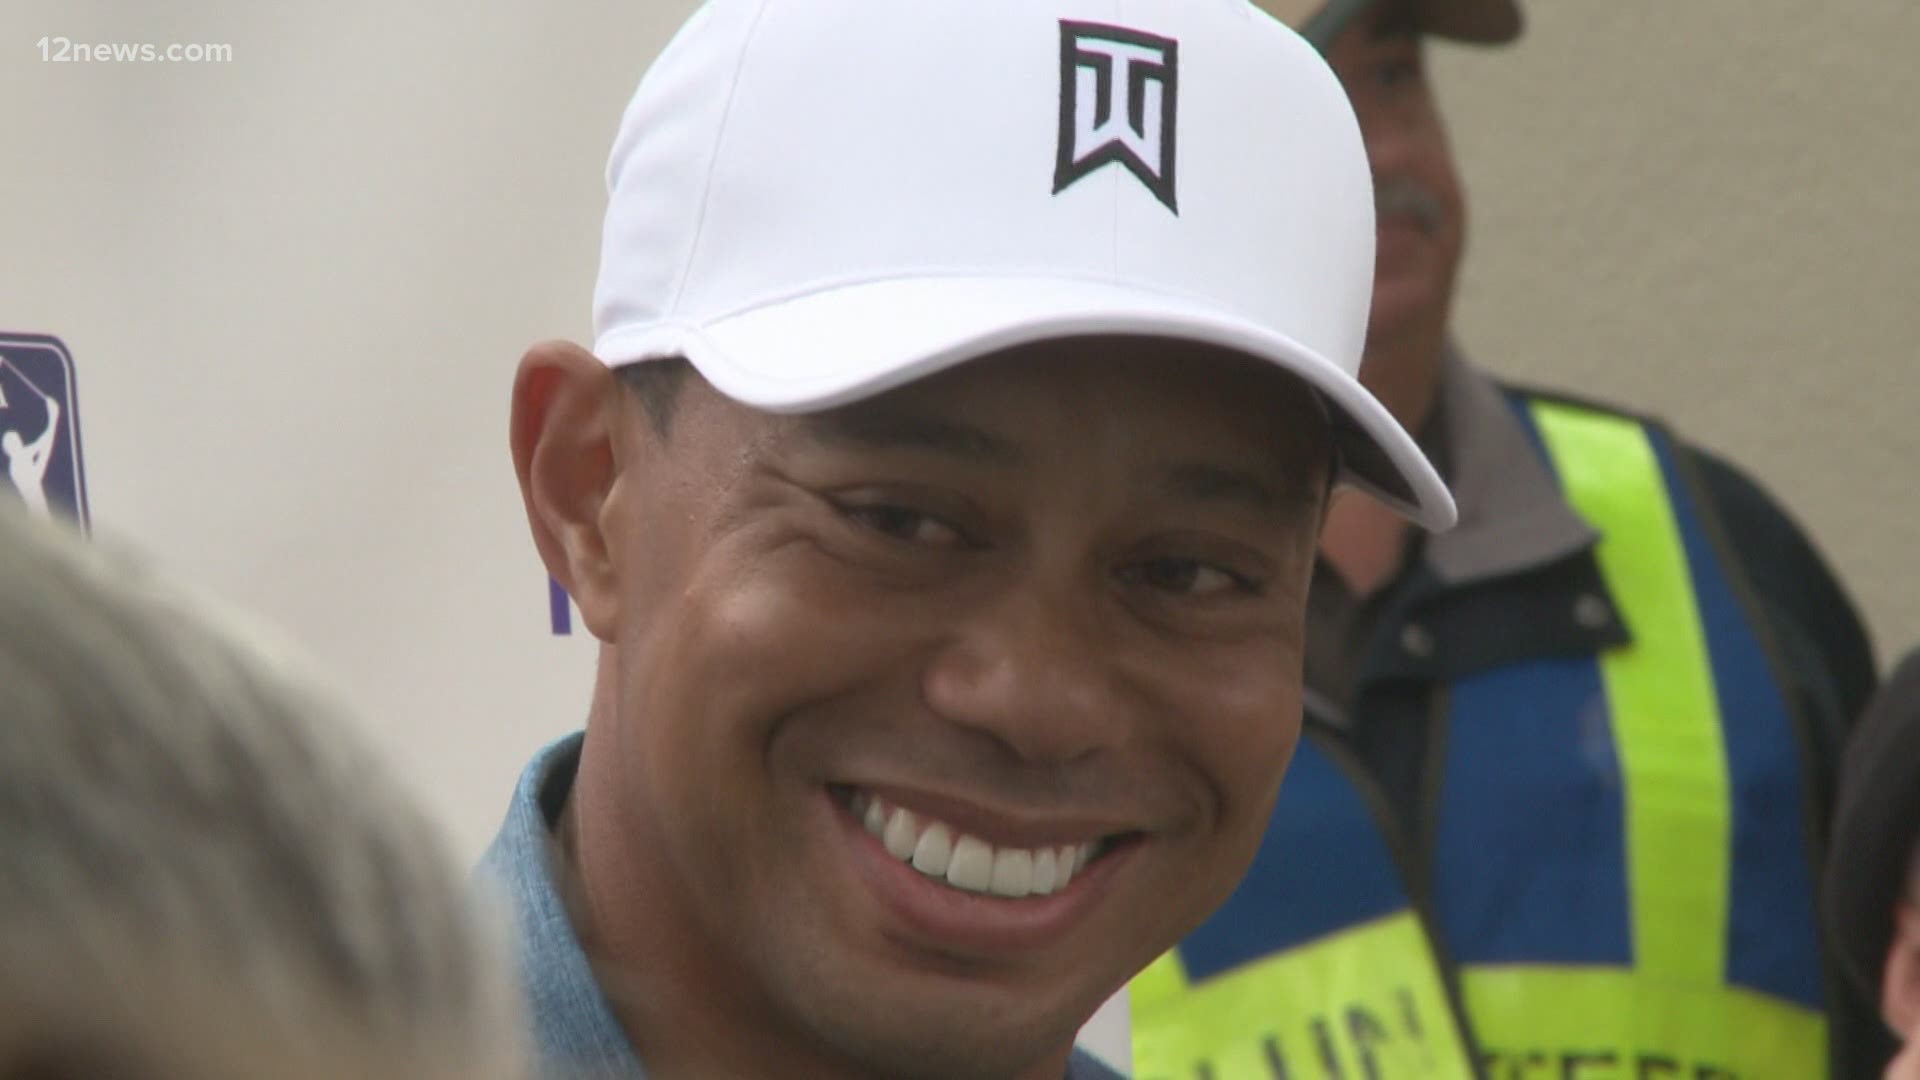 Tiger Woods was involved in a single-vehicle wreck in Los Angeles that left him hospitalized with leg injuries according to the L.A. County Sheriff's Department.
Tho